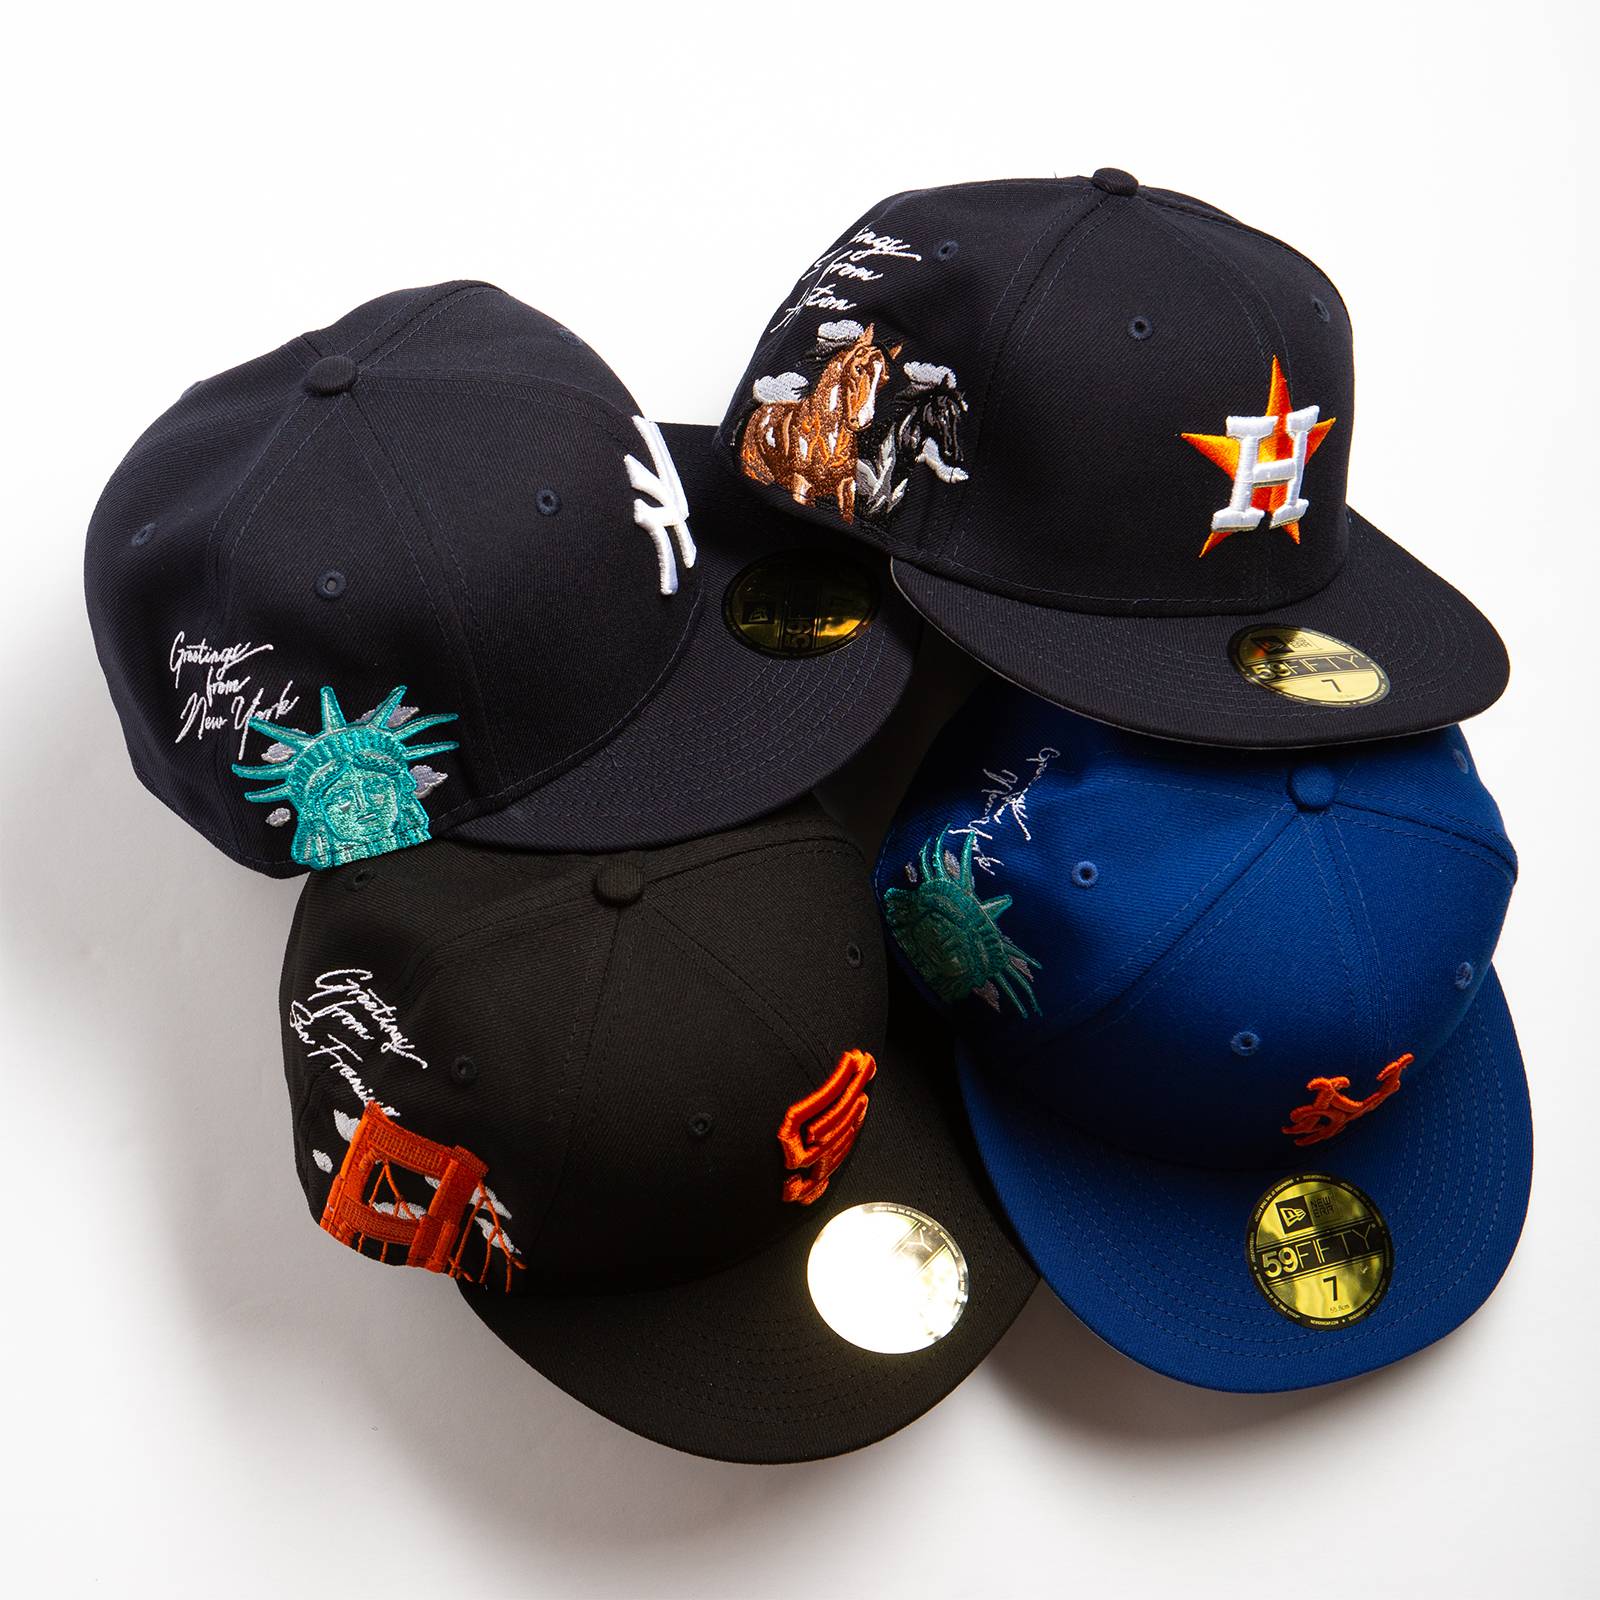 Latest New Era Collection Here